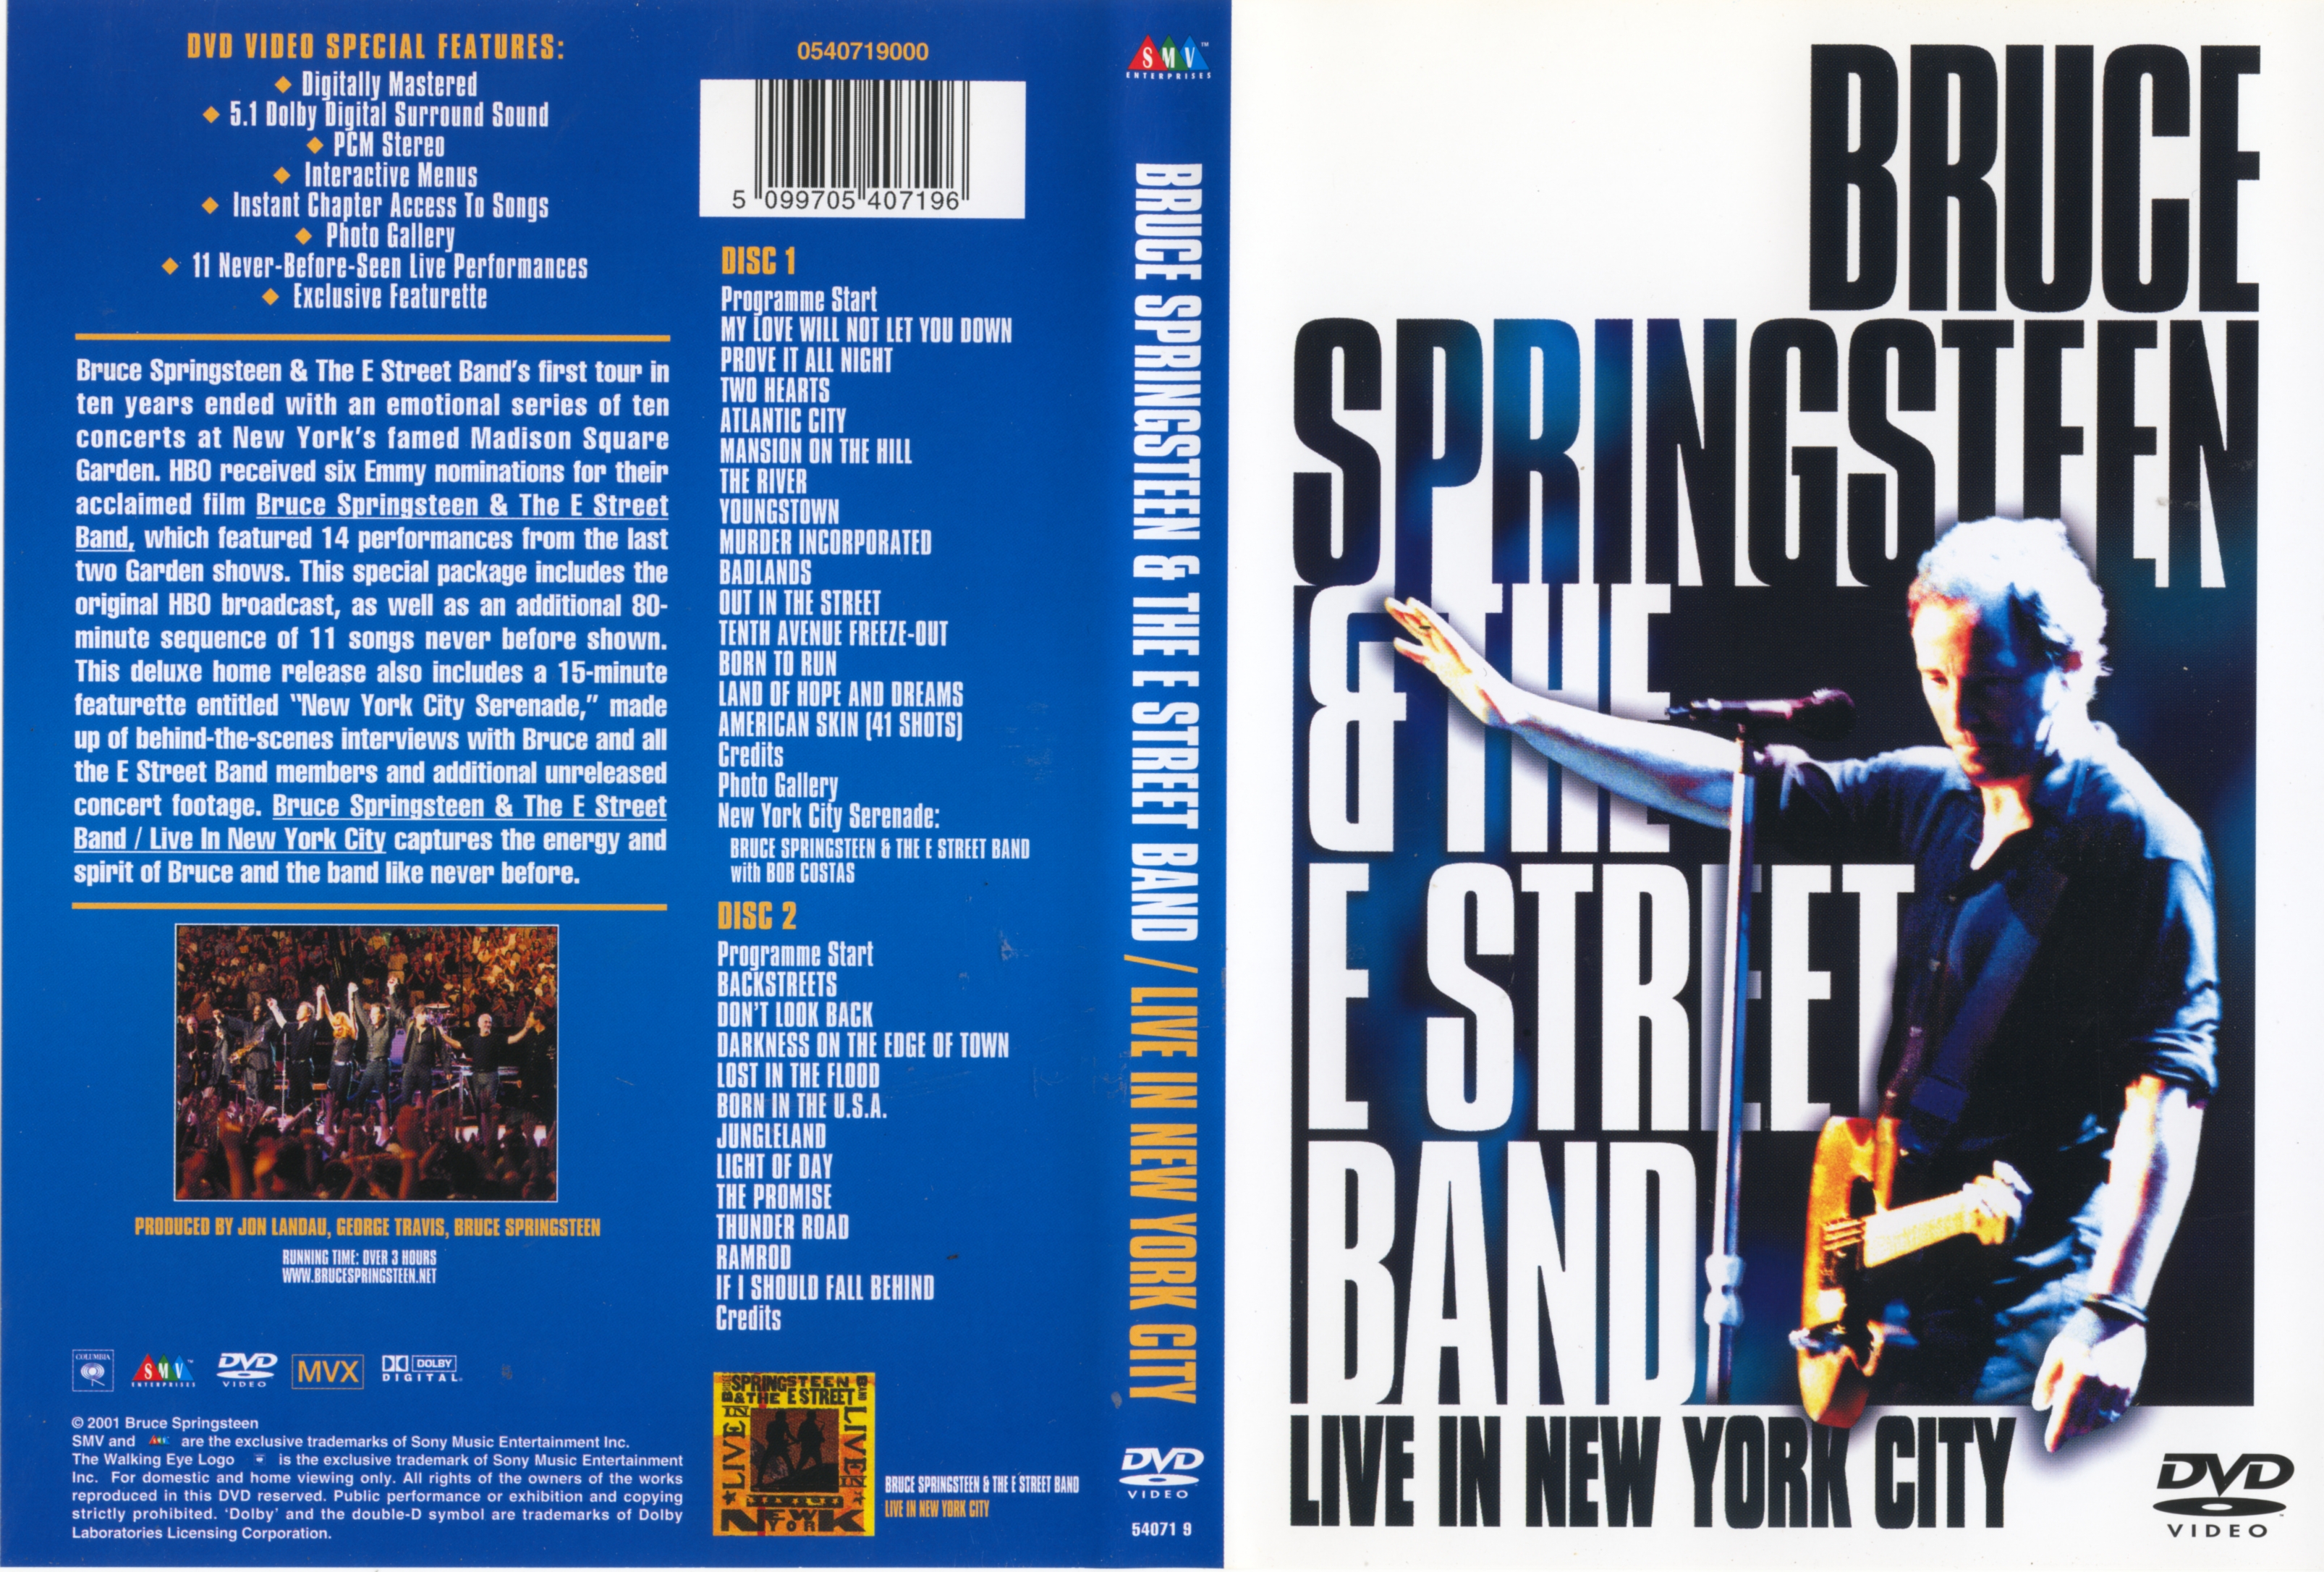 Jaquette DVD Bruce Springsteen & The E Street Band - Live in New York City